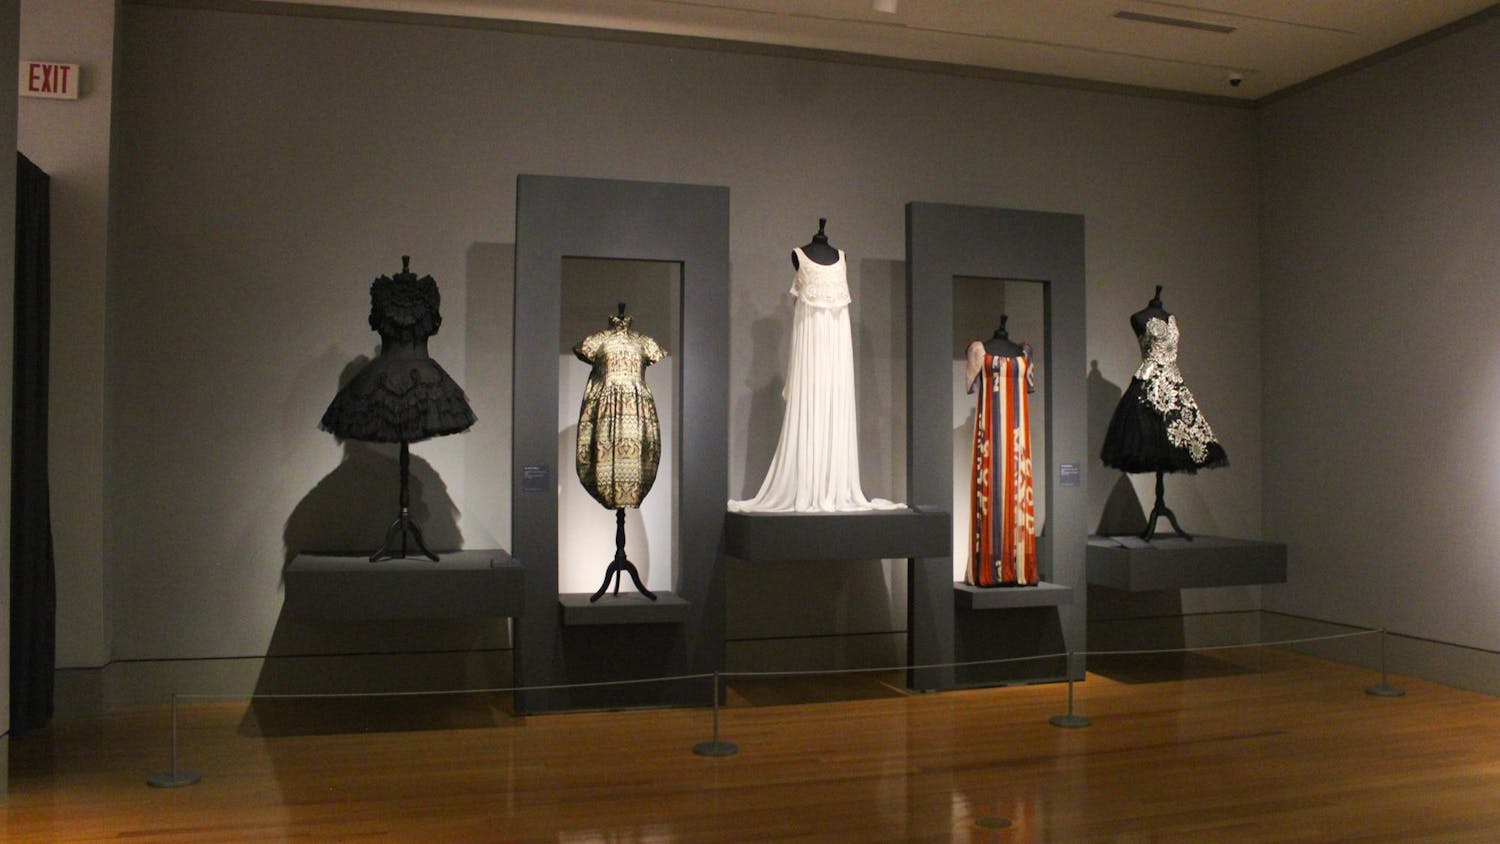 Five garments stand on display for “Rendez-Vous,” at the Columbia Museum of Art on Jan. 9, 2023. The exhibit displays over fifty garments designed by fashion icon Lee Alexander McQueen, as well as photographs of the designer and his work, by Ann Ray.